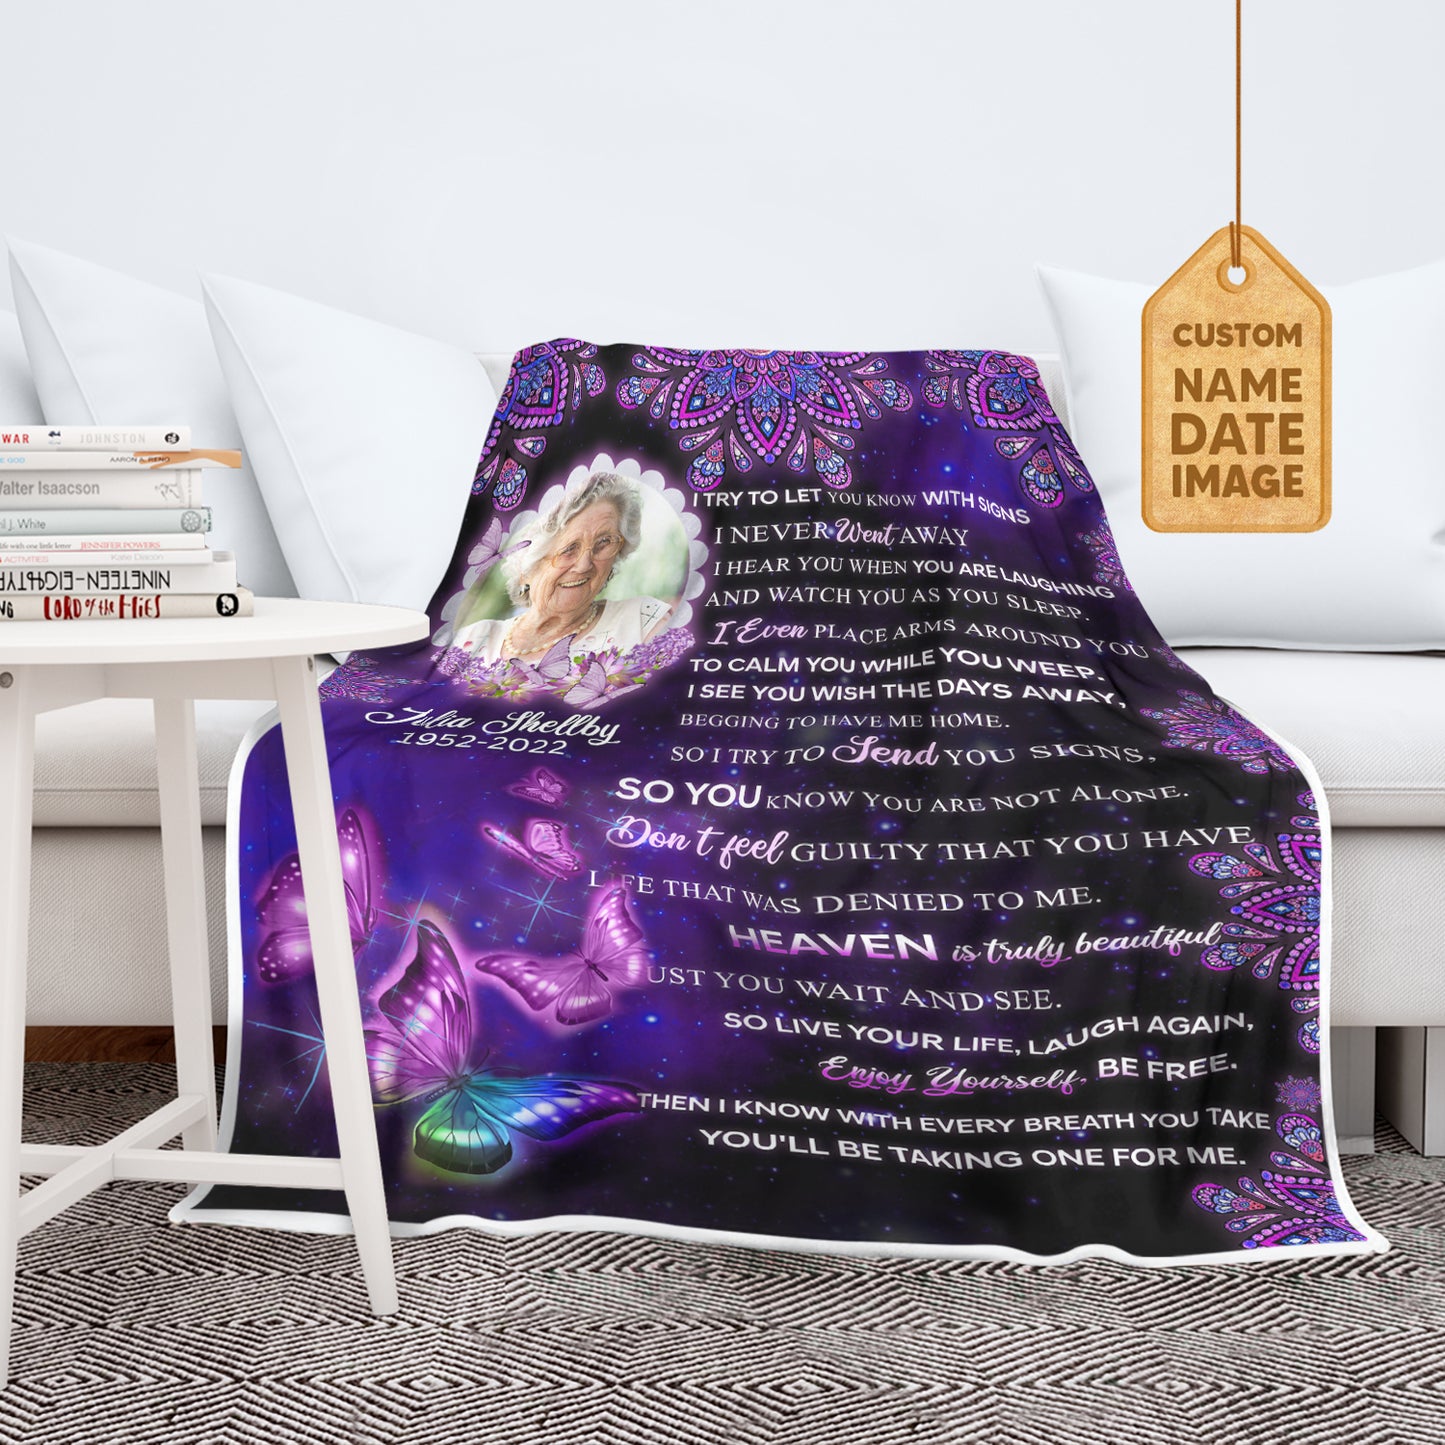 I Try To Let You Know With Signs Custom Image Fleece Blanket